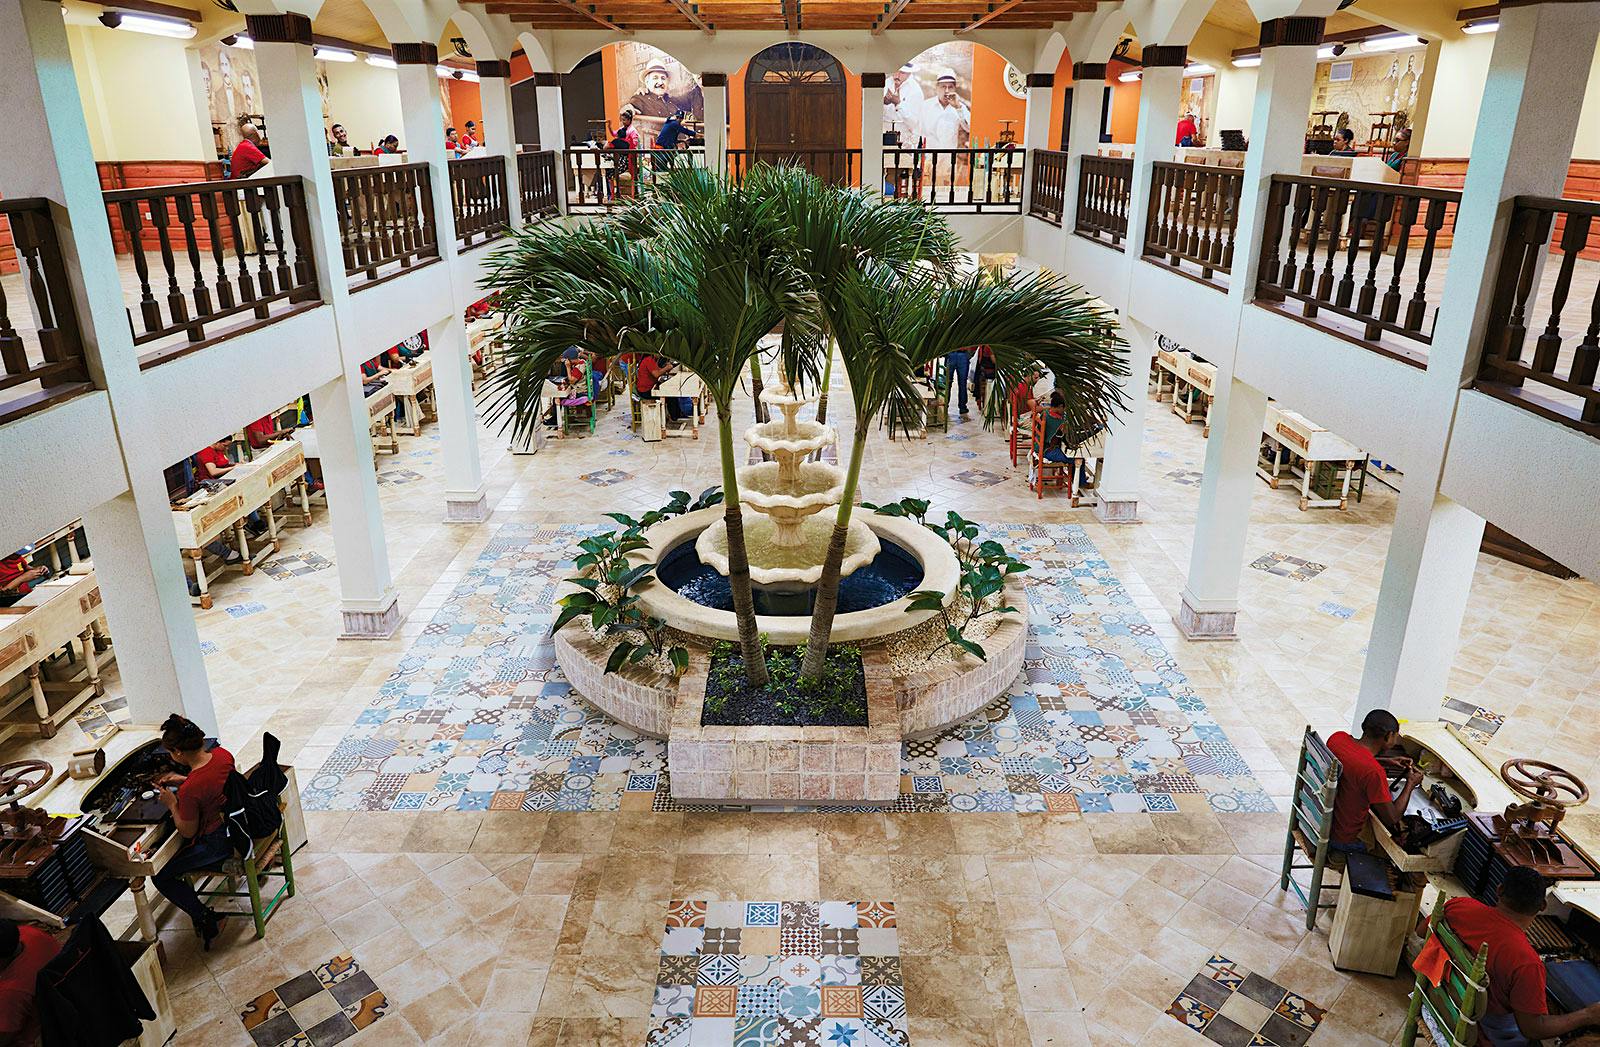 A view from the upper level of the grand courtyard. The fountain brings a tranquil air as rollers make cigars on both floors of the “cathedral of tobacco.”